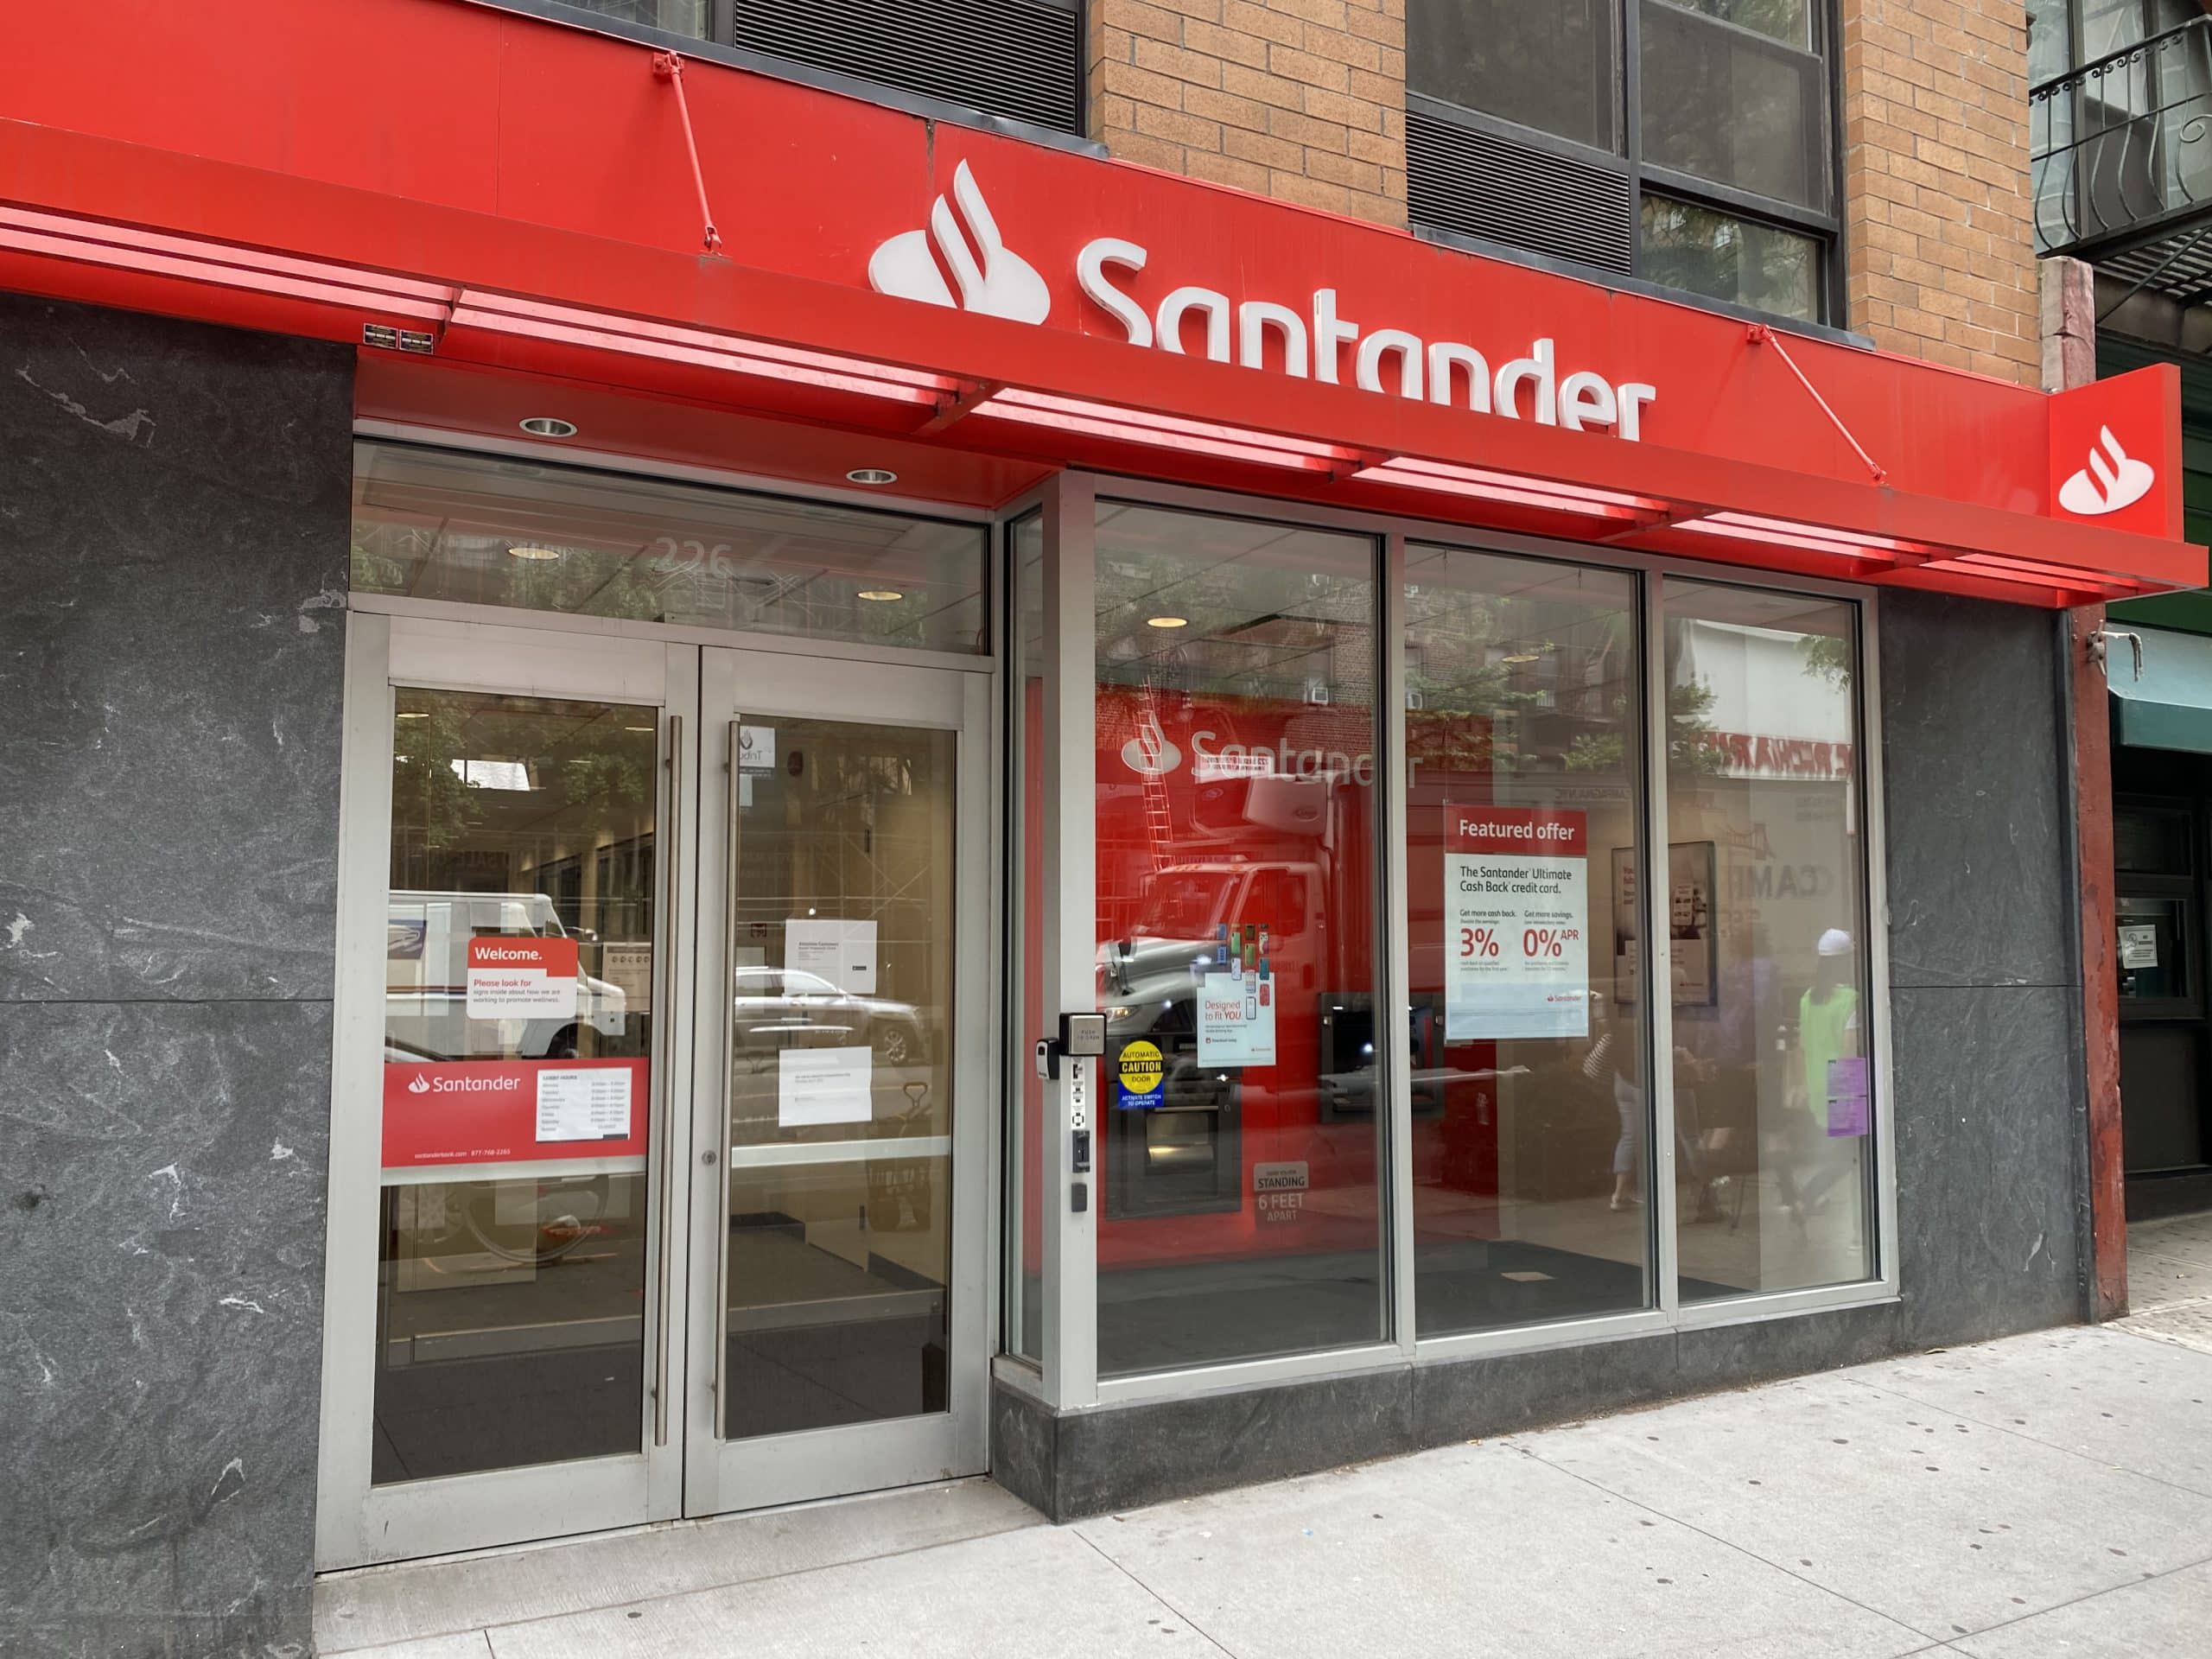 The Santander bank at 226 East 86th Street was robbed by the suspect in July, police say | Upper East Site